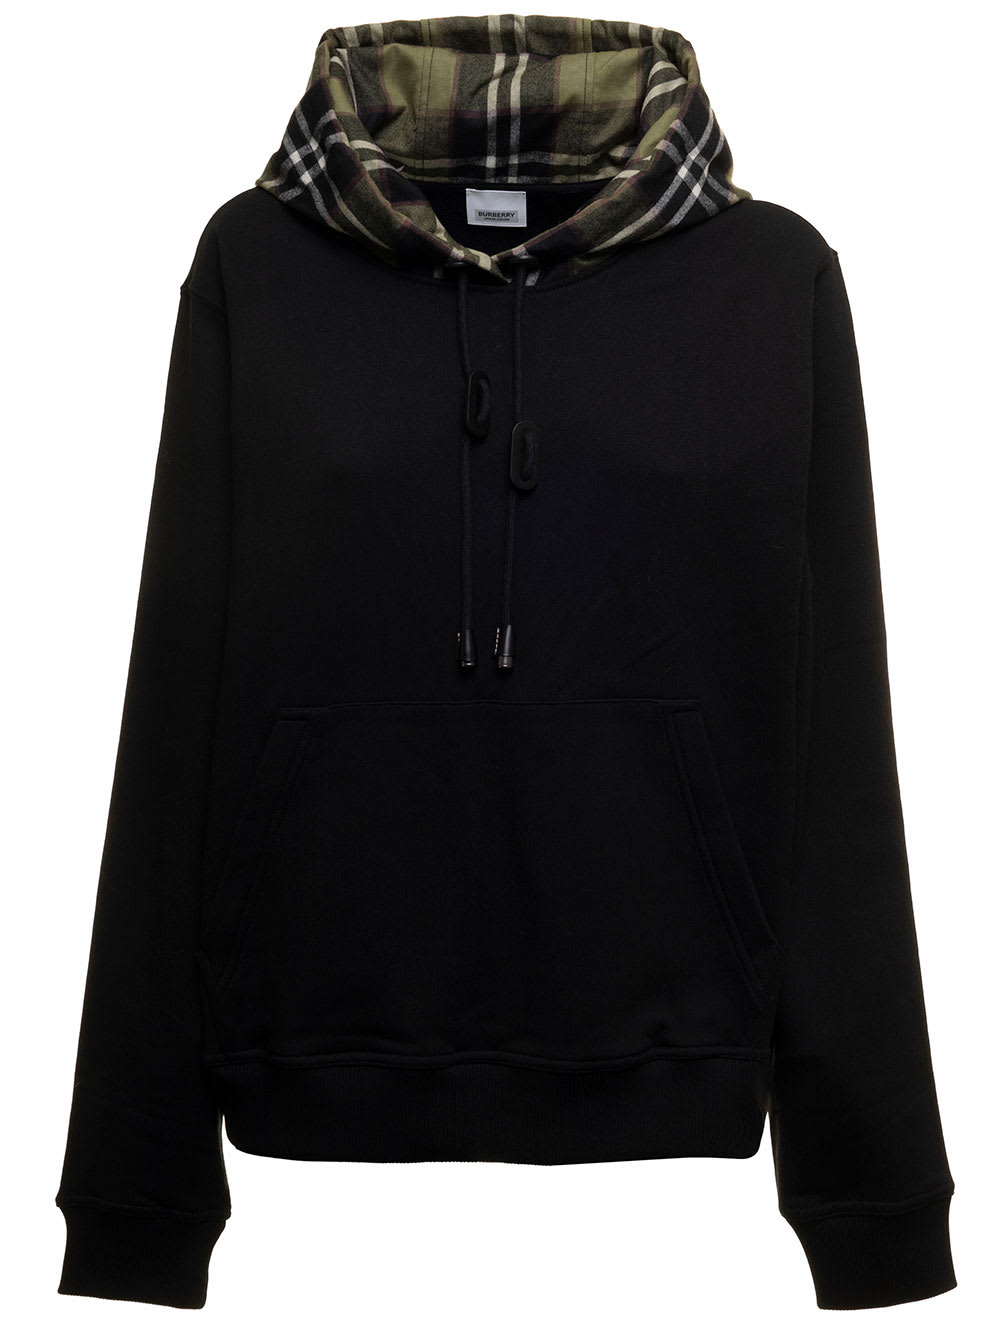 Burberry Black Poulter Cotton Hoodie With Vintage Check Print Burberry Woman